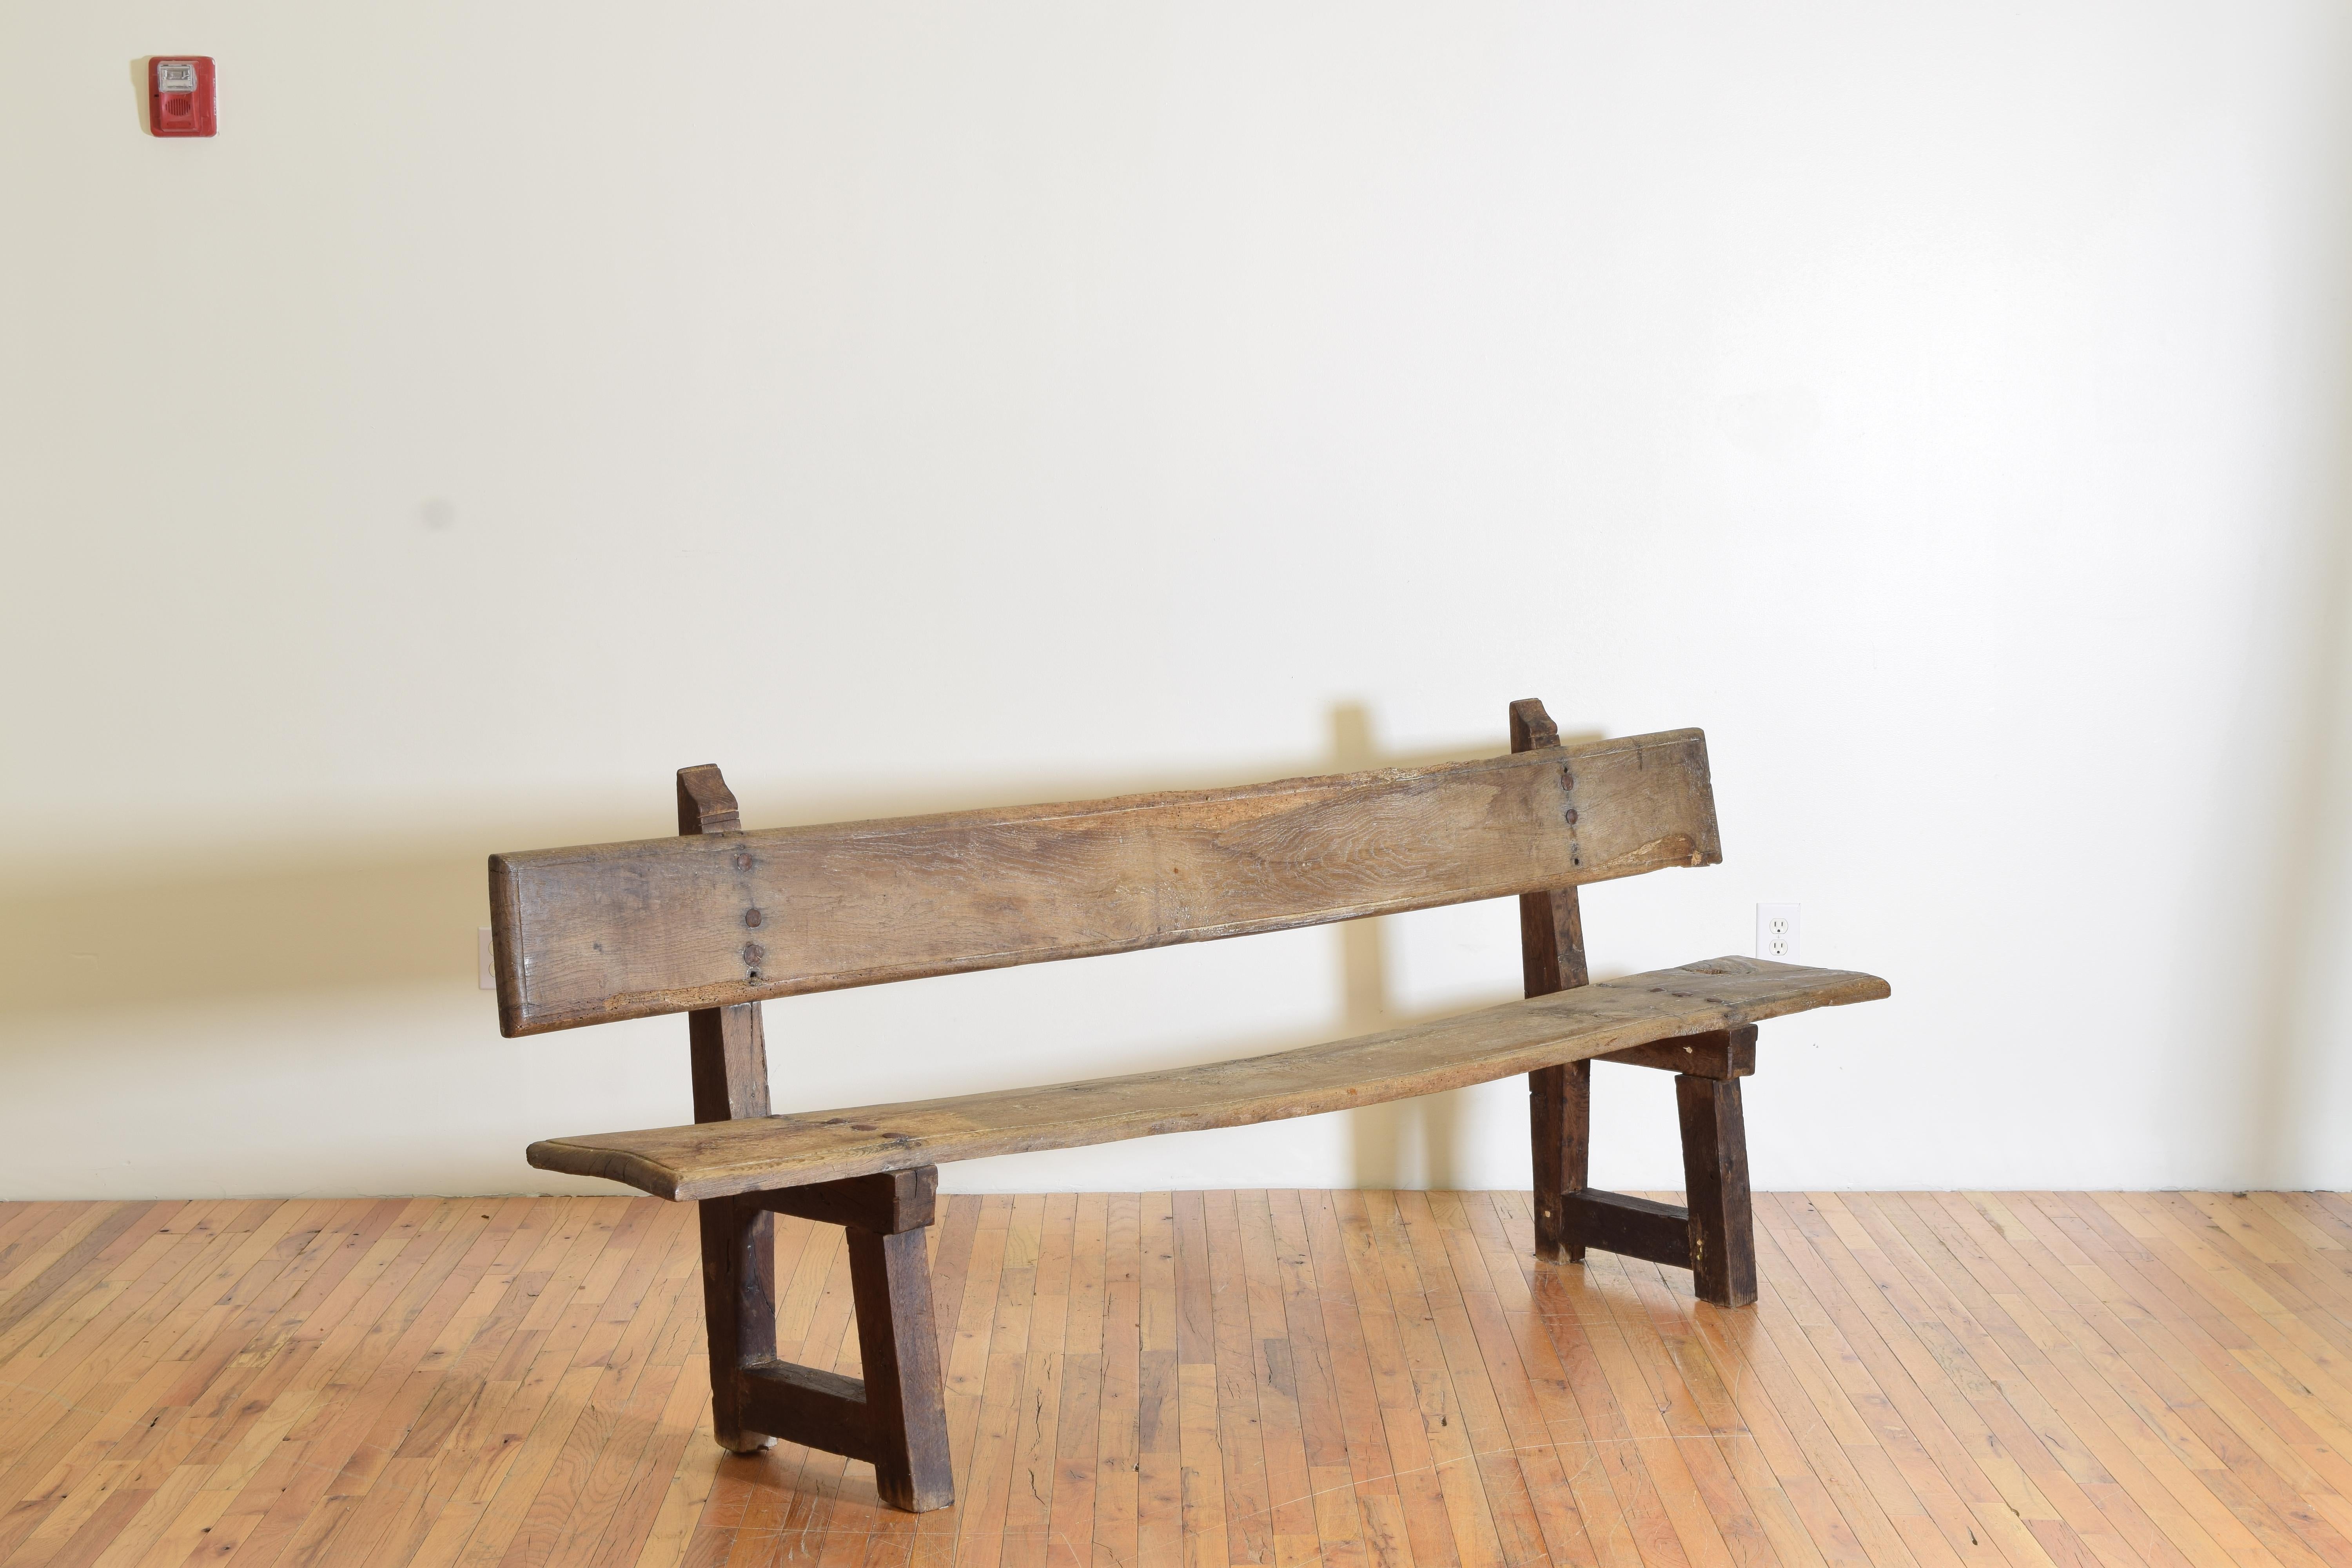 In a primitive style this bench was originally built for a hallway or perhaps even a private chapel, having two trestle form supports with stylized finial tops supporting plank seats and backs, the planks having molded edges and joined to the bases